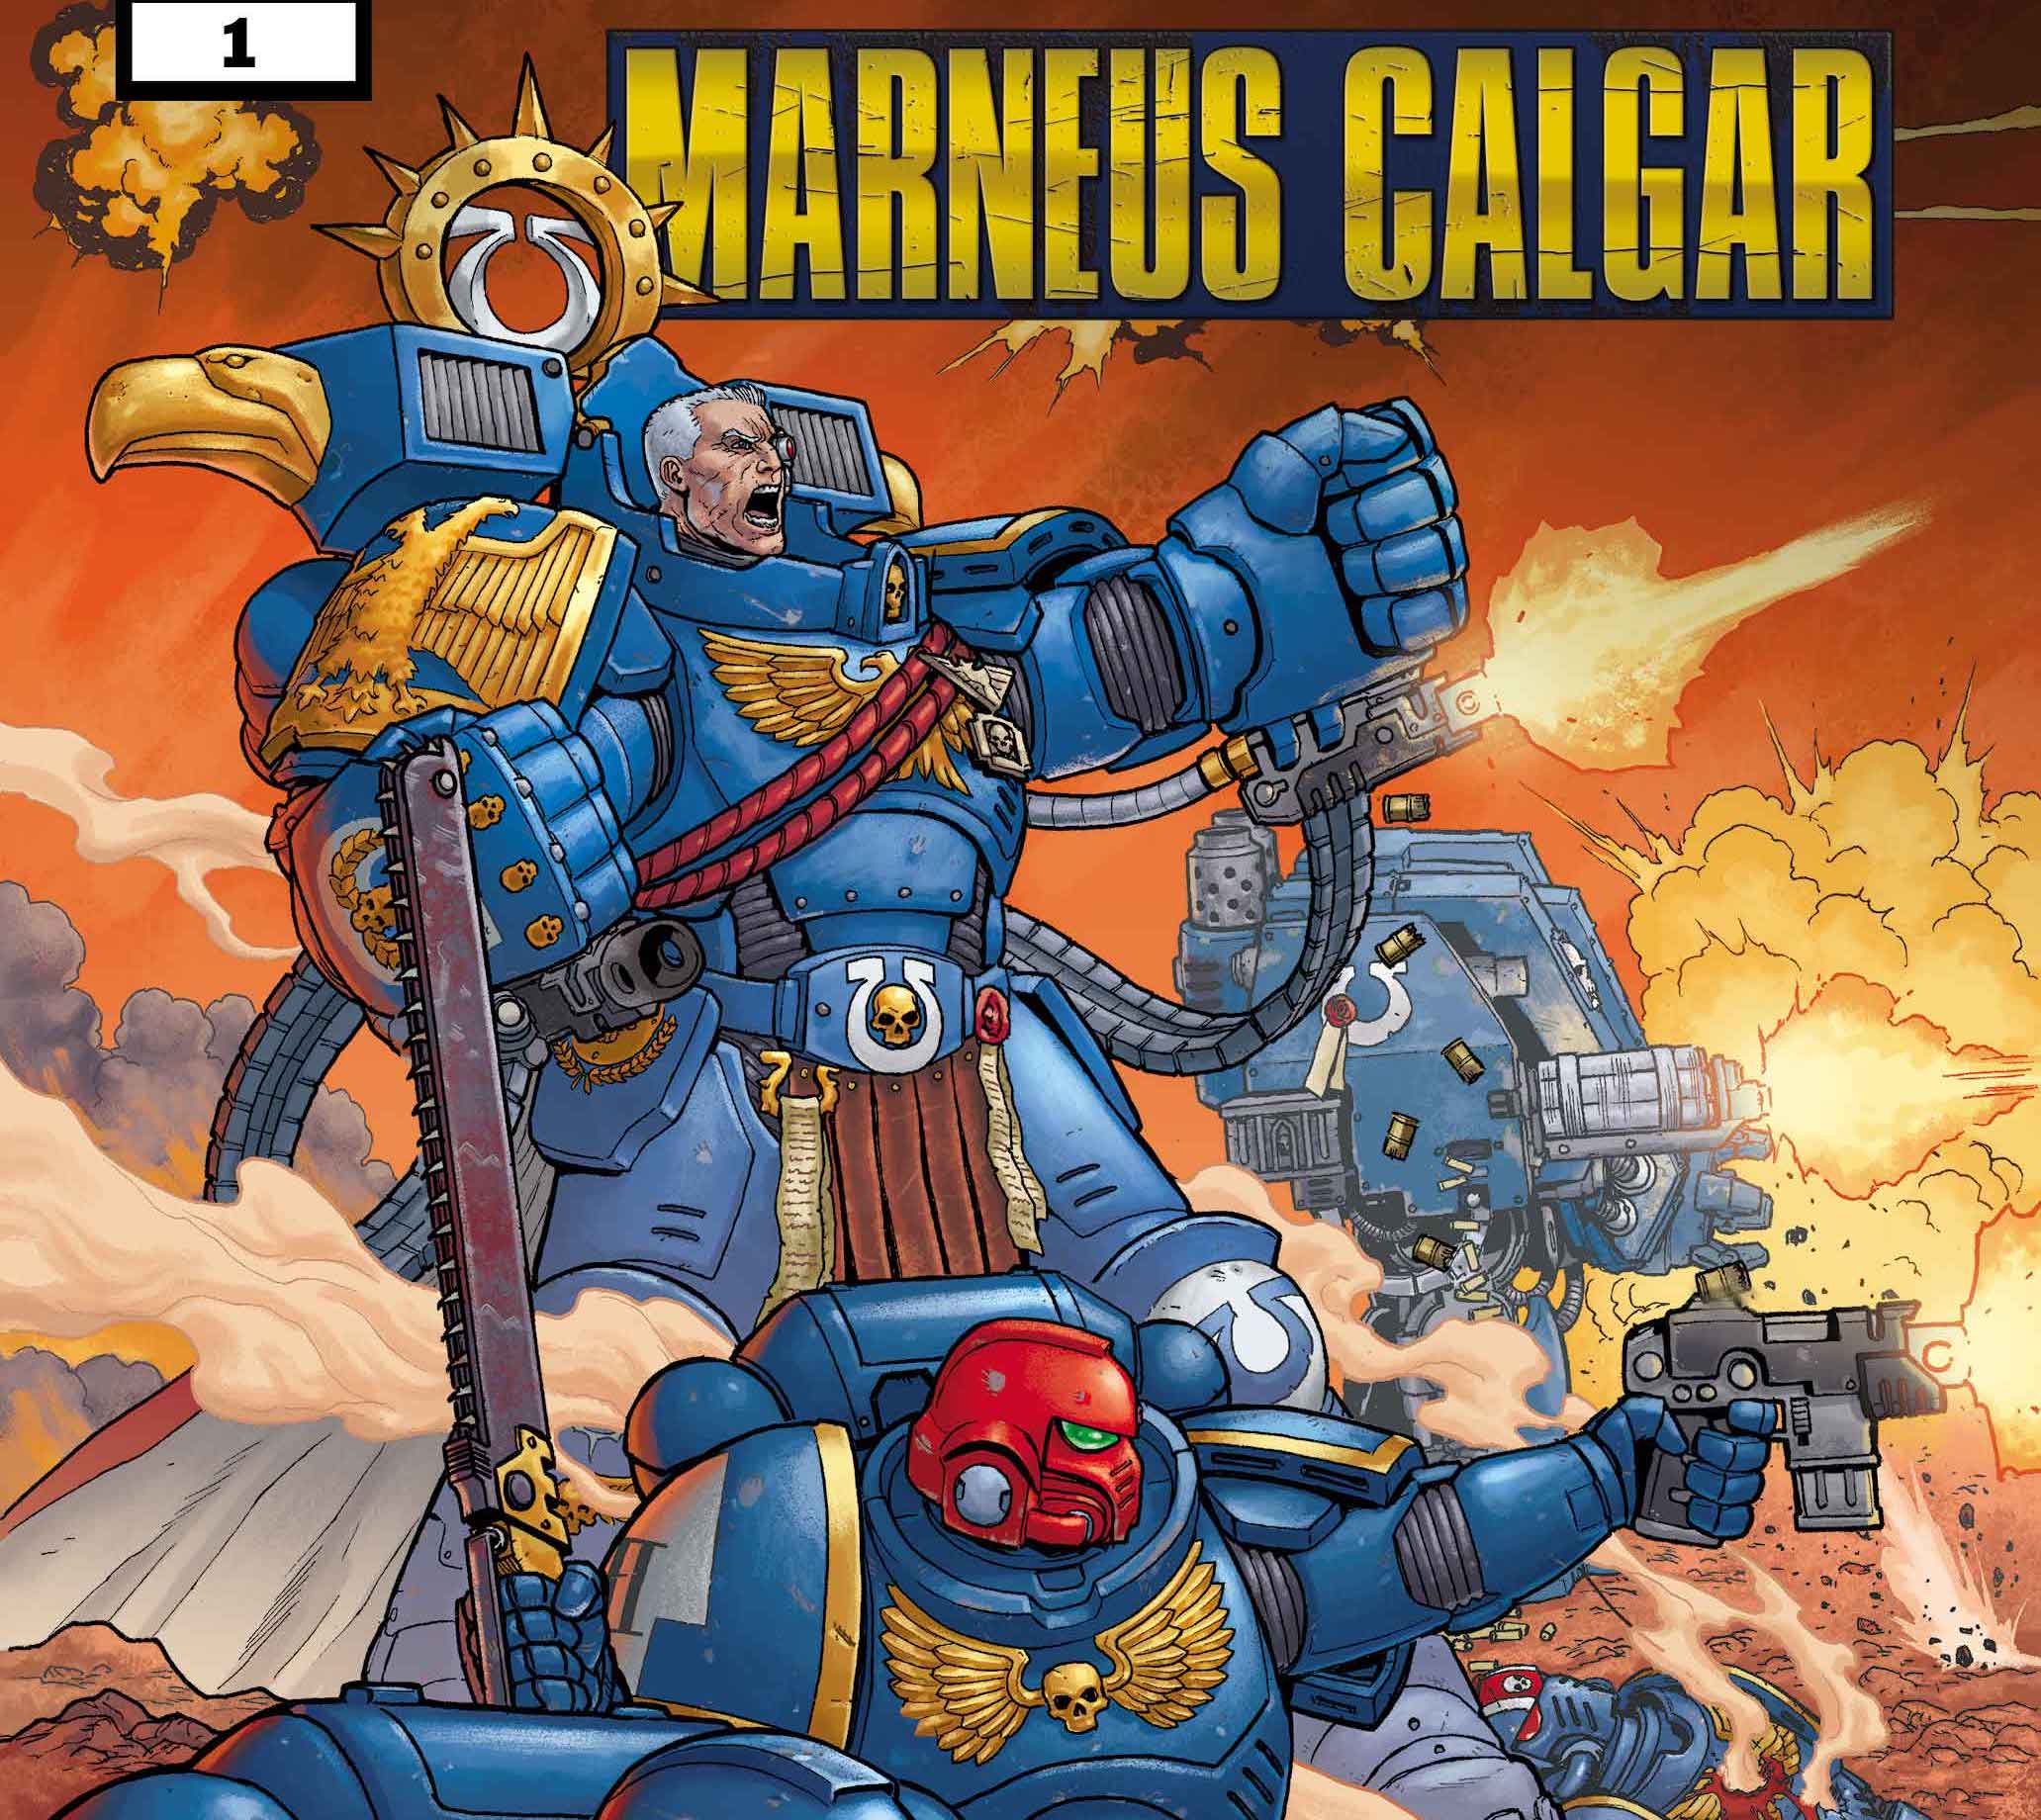 Get your Warhammer 40,000 on this October from Kieron Gillen and Jacen Burrows